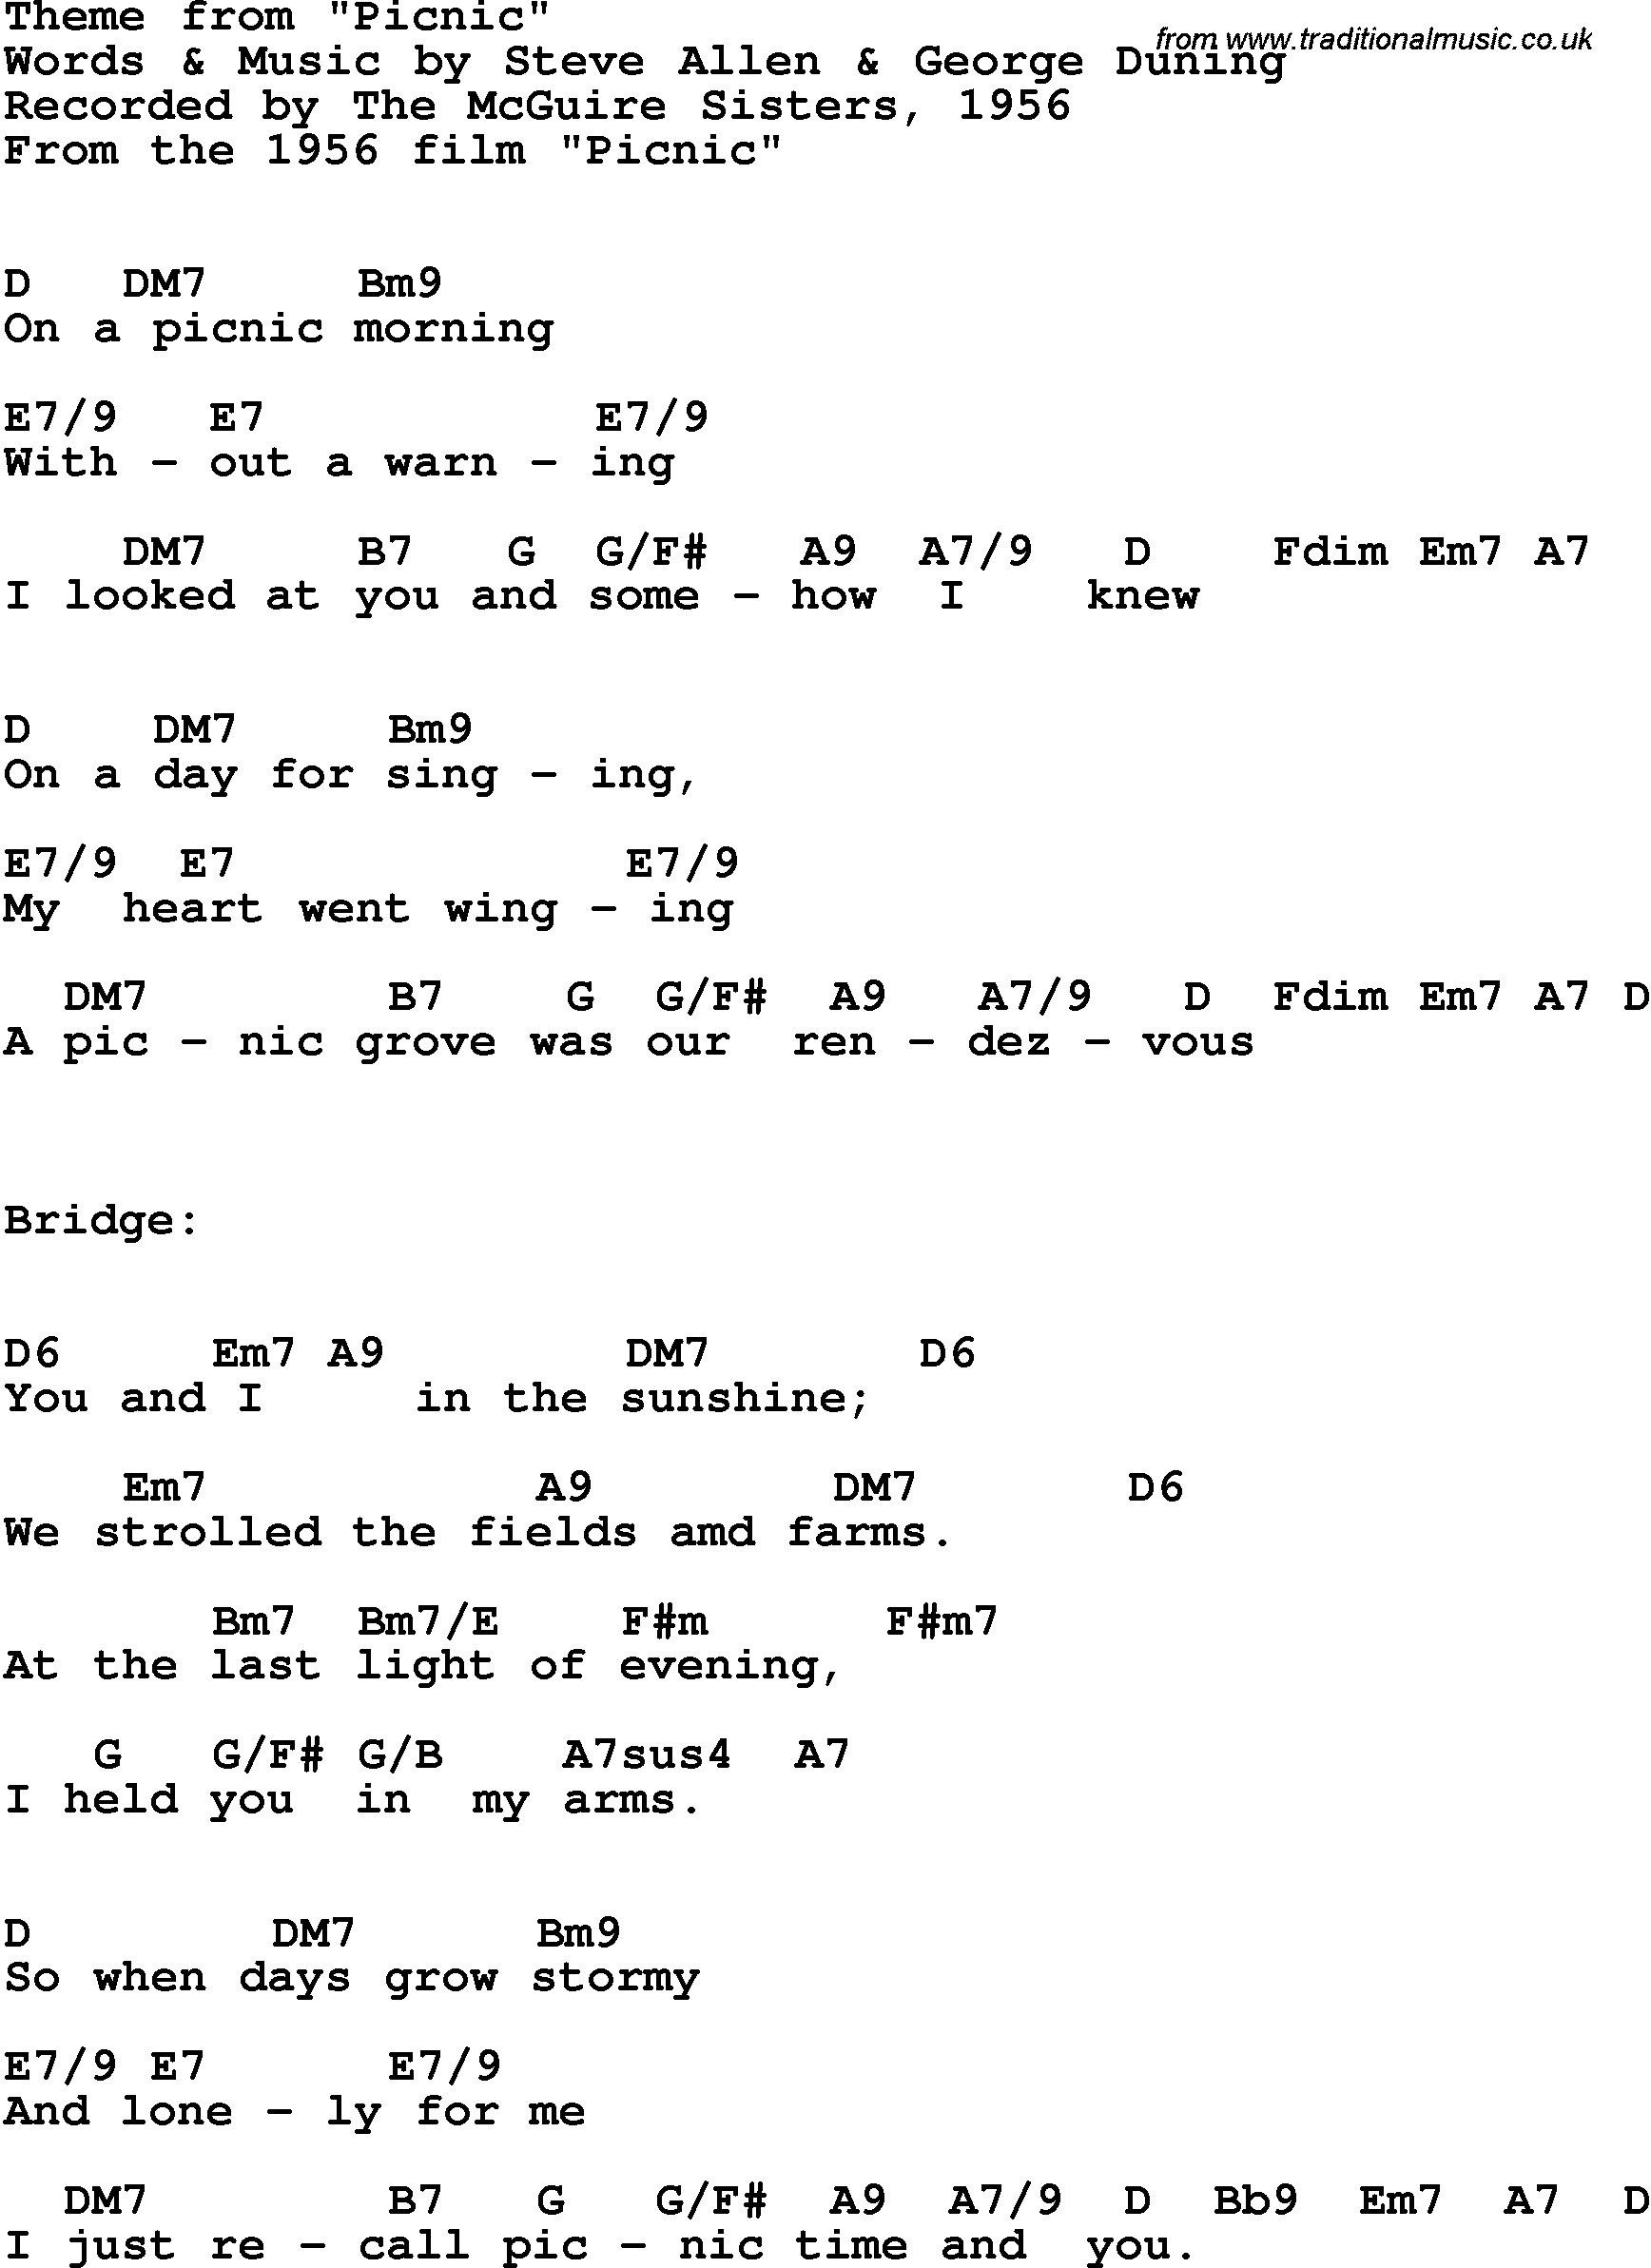 Song Lyrics with guitar chords for Picnic - The Mcguire Sisters, 1956